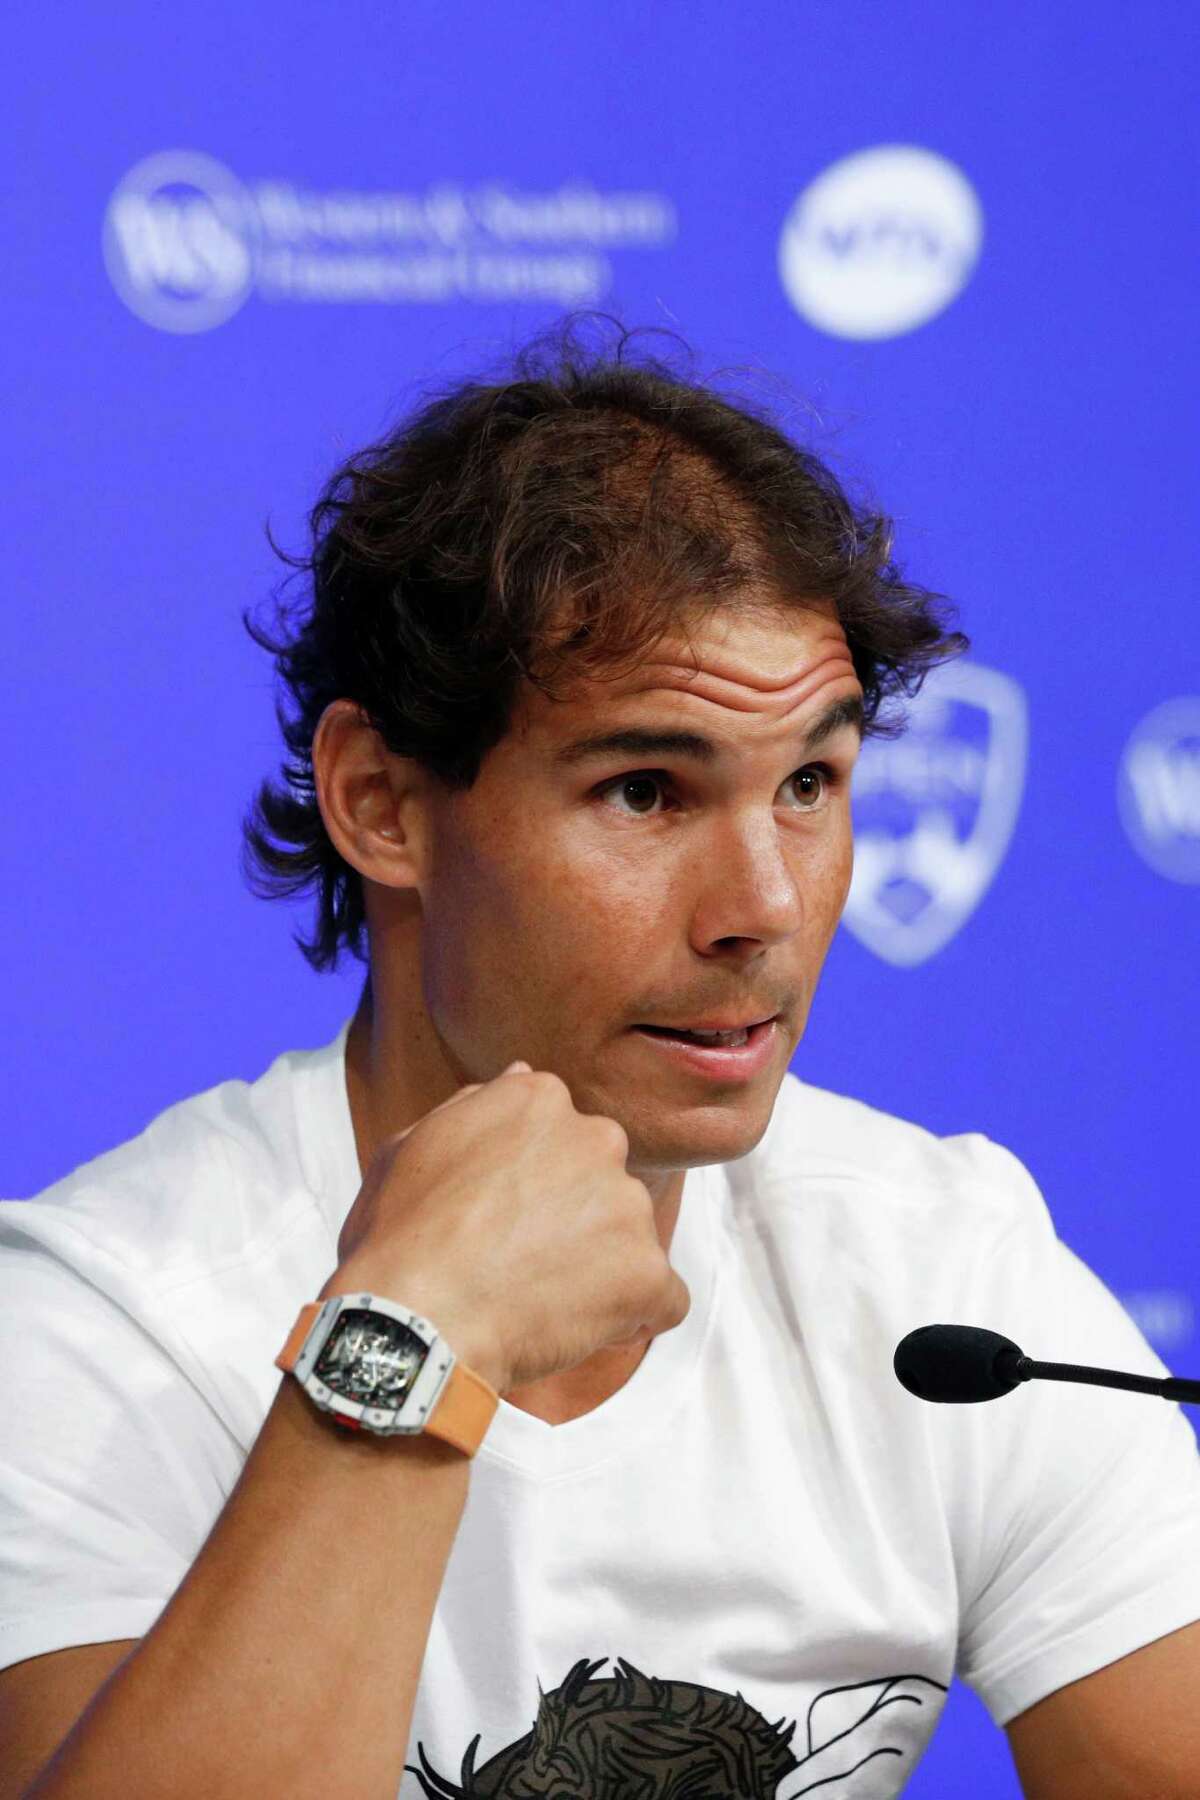 MASON, OH - AUGUST 16: Rafael Nadal of Spain speaks to the media on Day 4 of the Western & Southern Open at the Lindner Family Tennis Center on August 16, 2016 in Mason, Ohio. (Photo by Joe Robbins/Getty Images) ORG XMIT: 634842747